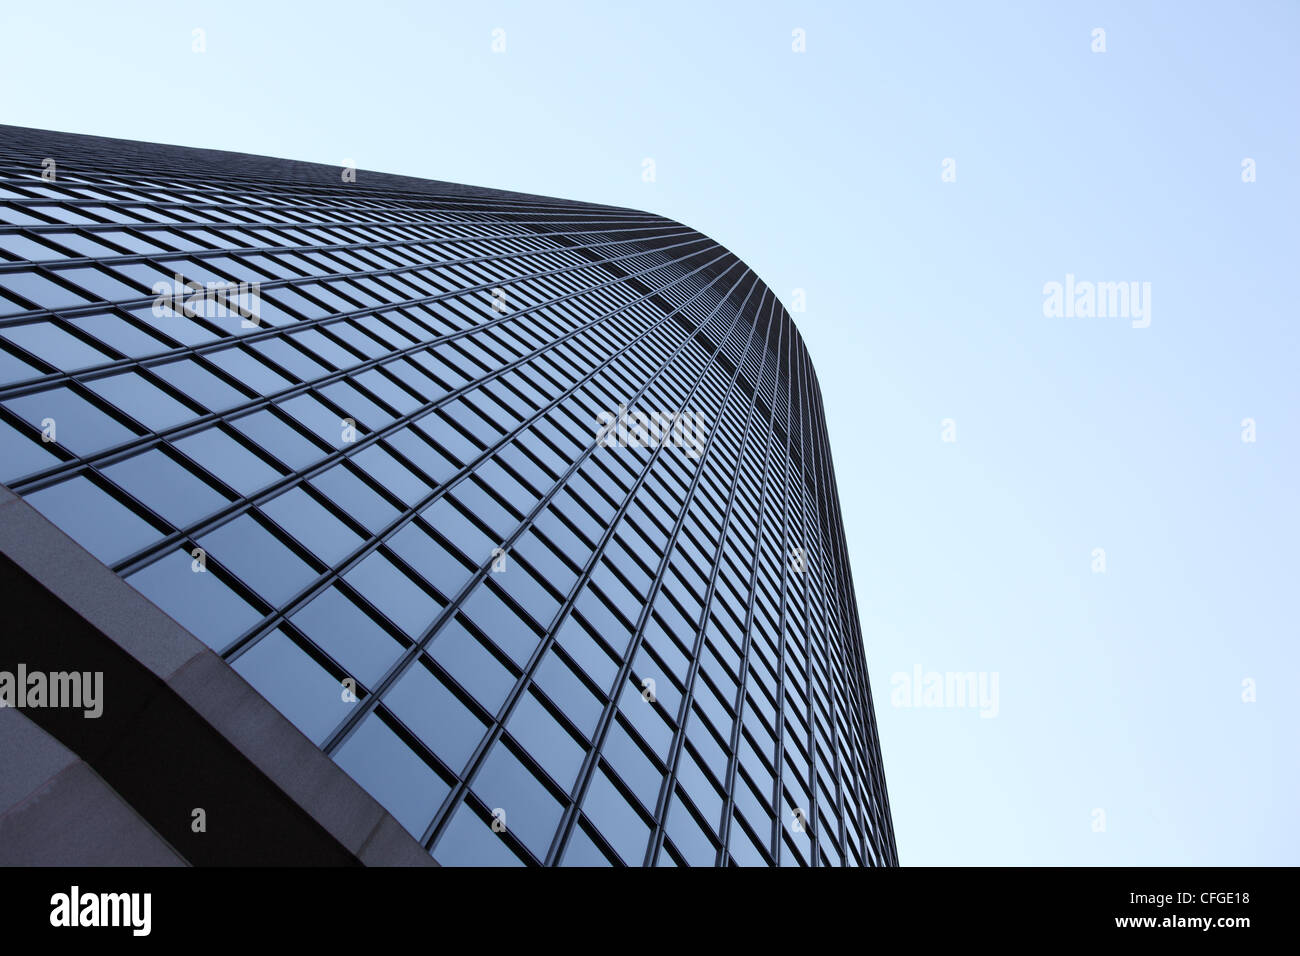 A tall windowed skyscraper with sky background Stock Photo